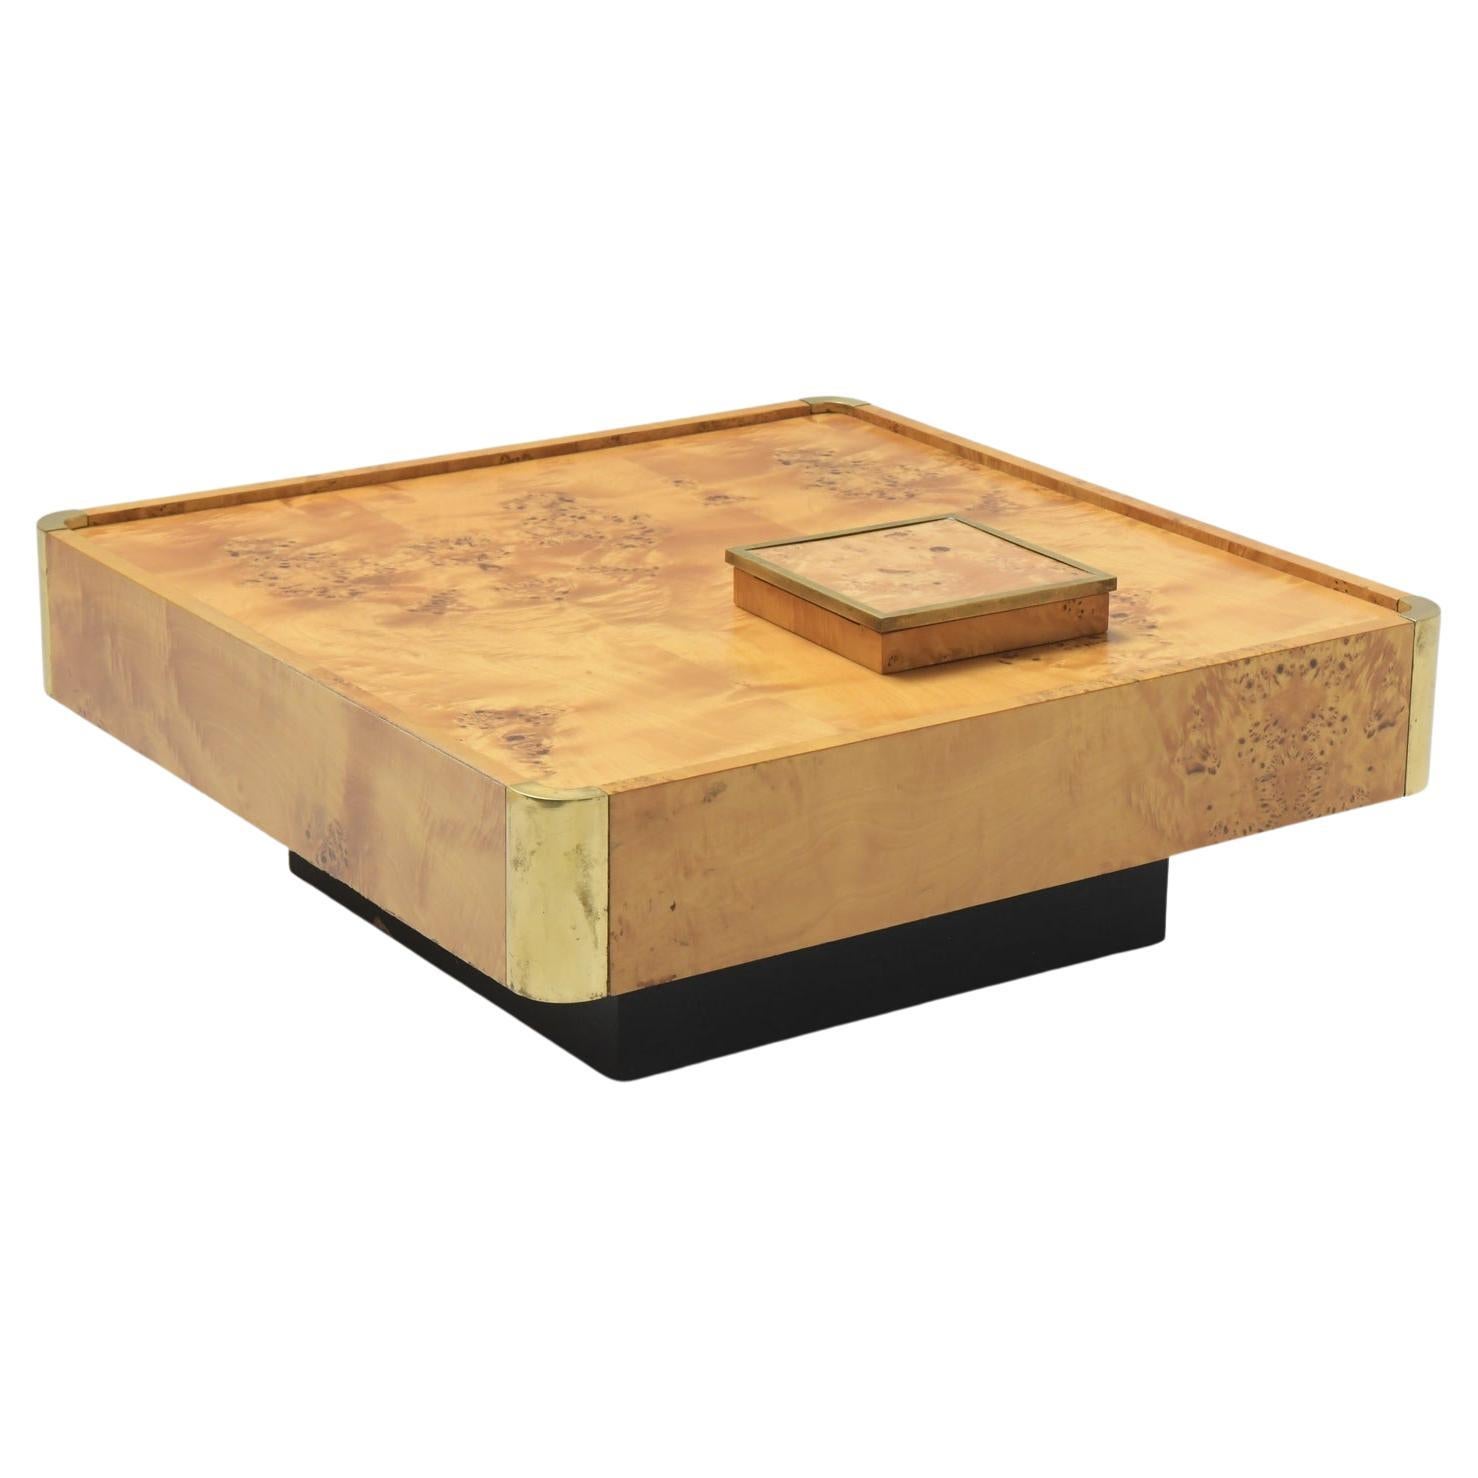 Coffee table & cigar box in burlwood & golden messing box - Willy Rizzo - Italy